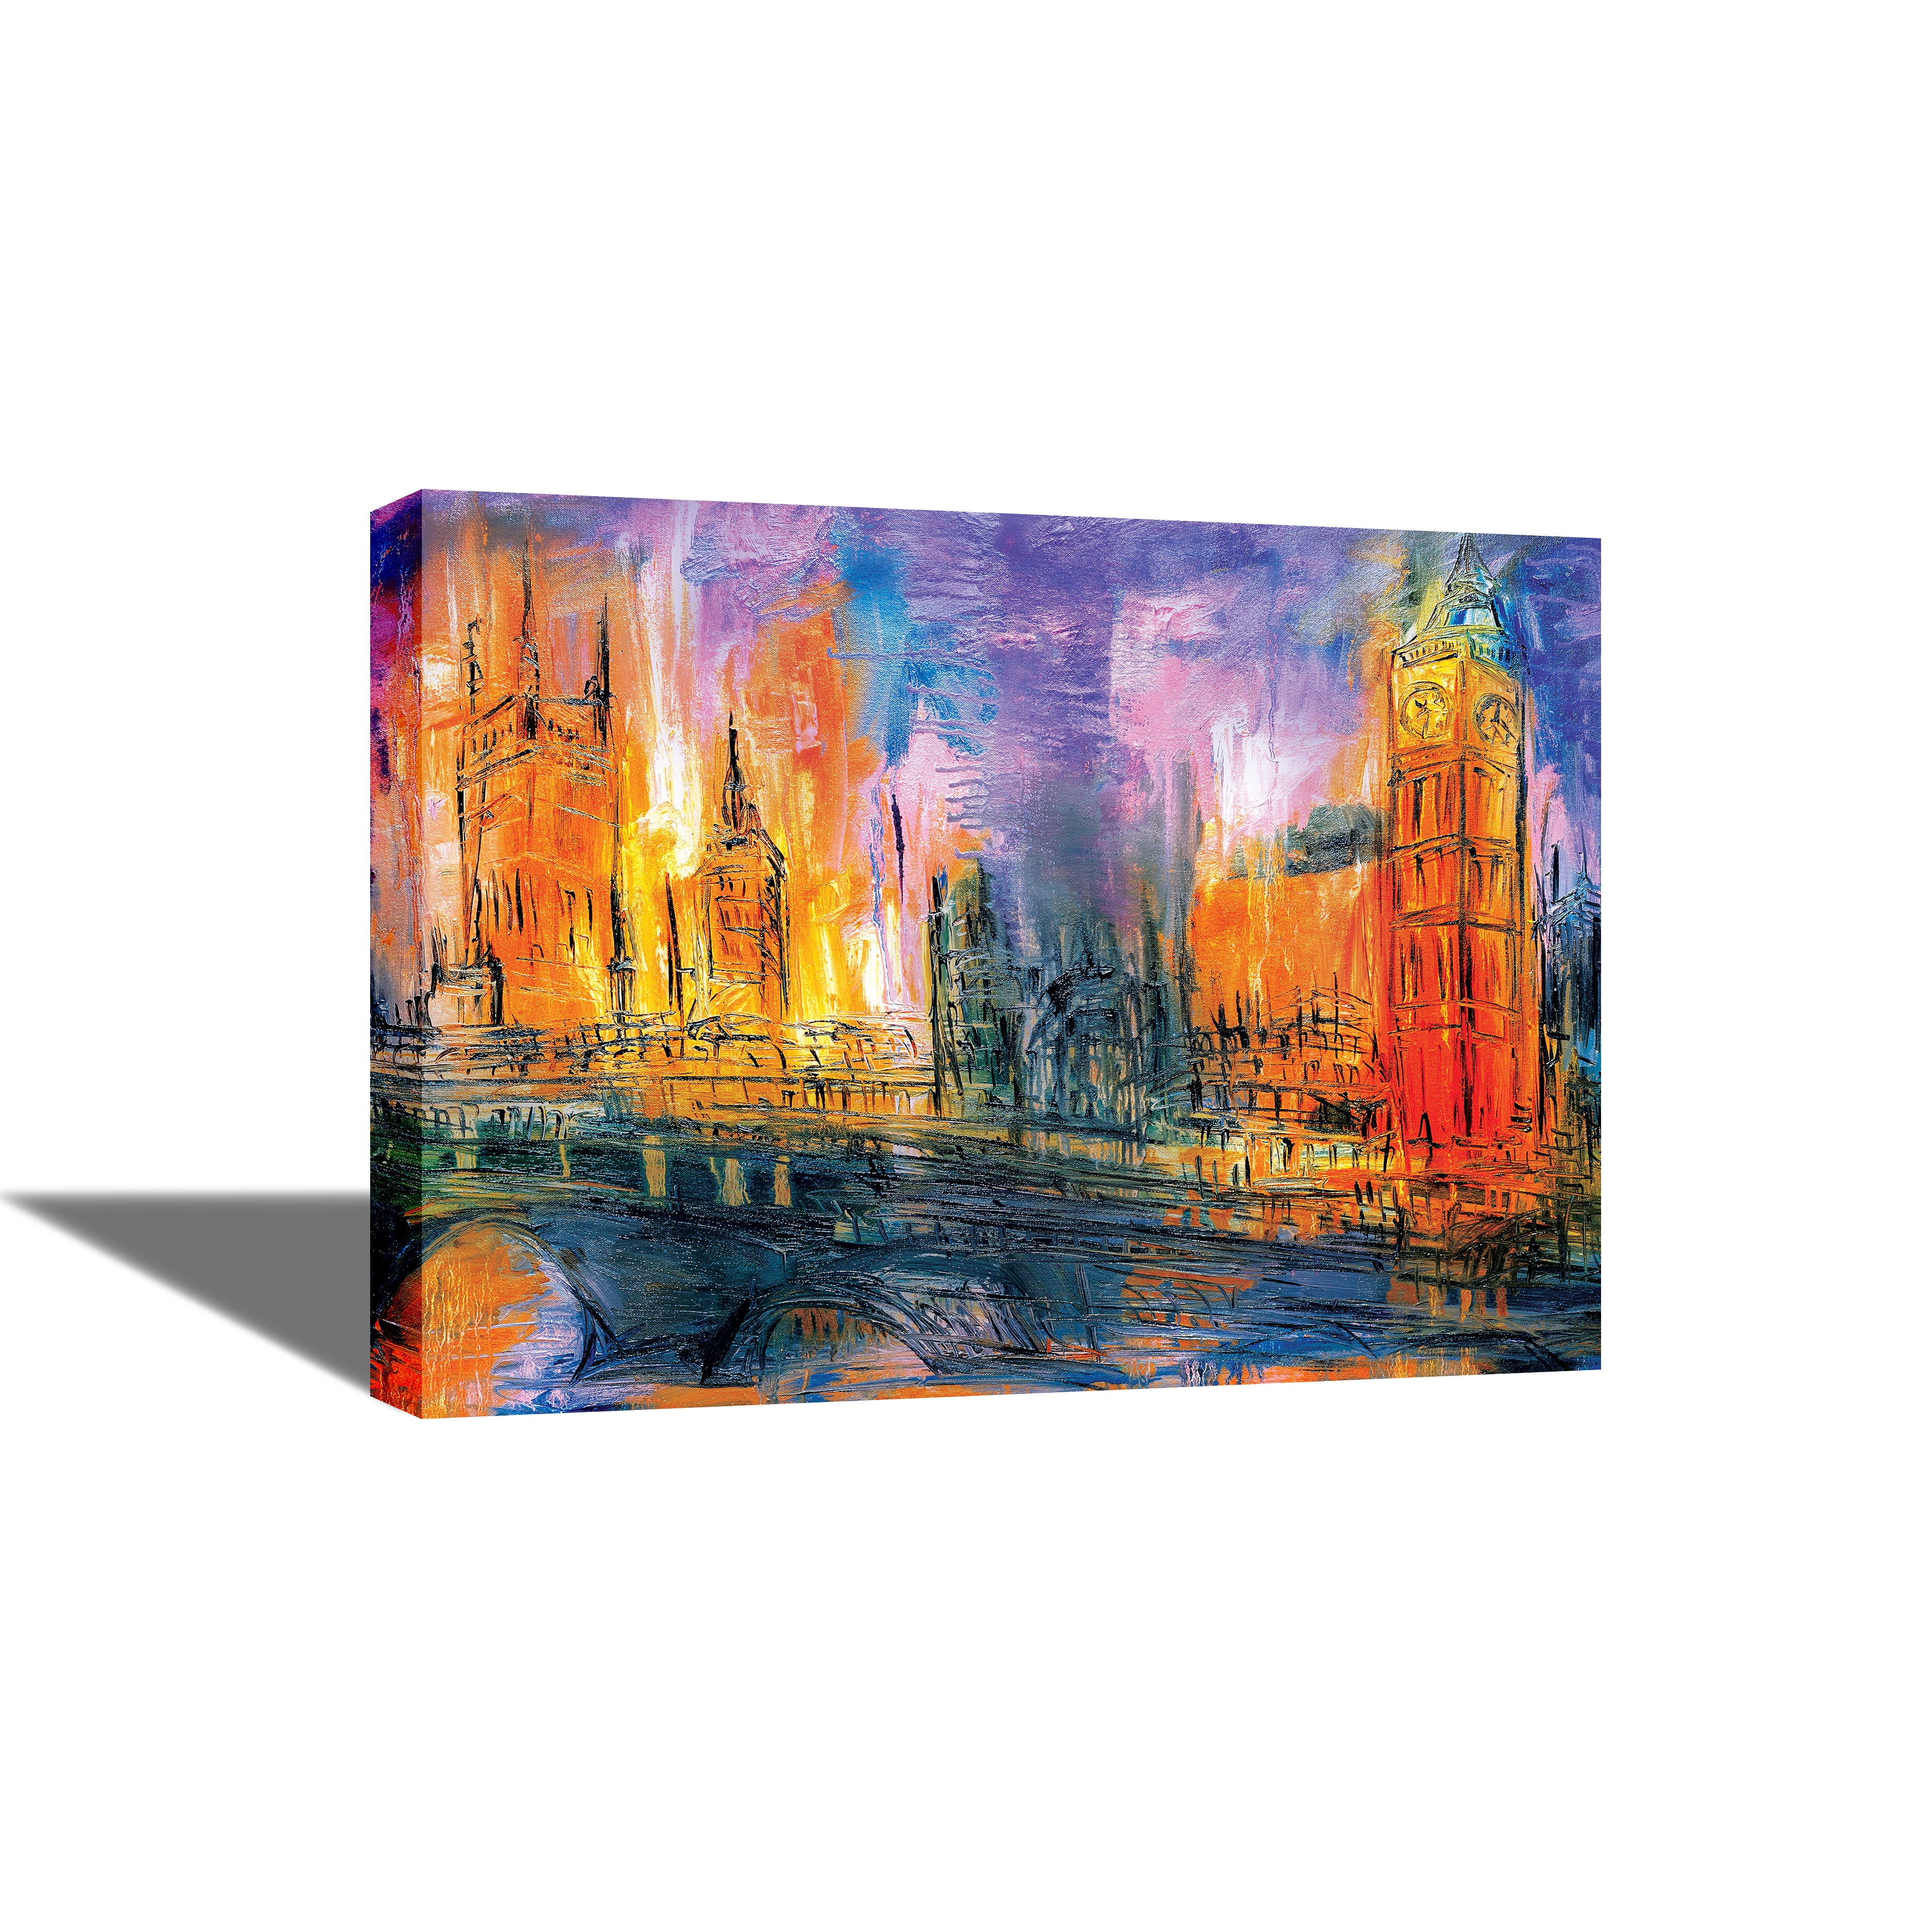 The Big Ben - Canvas Painting - Framed